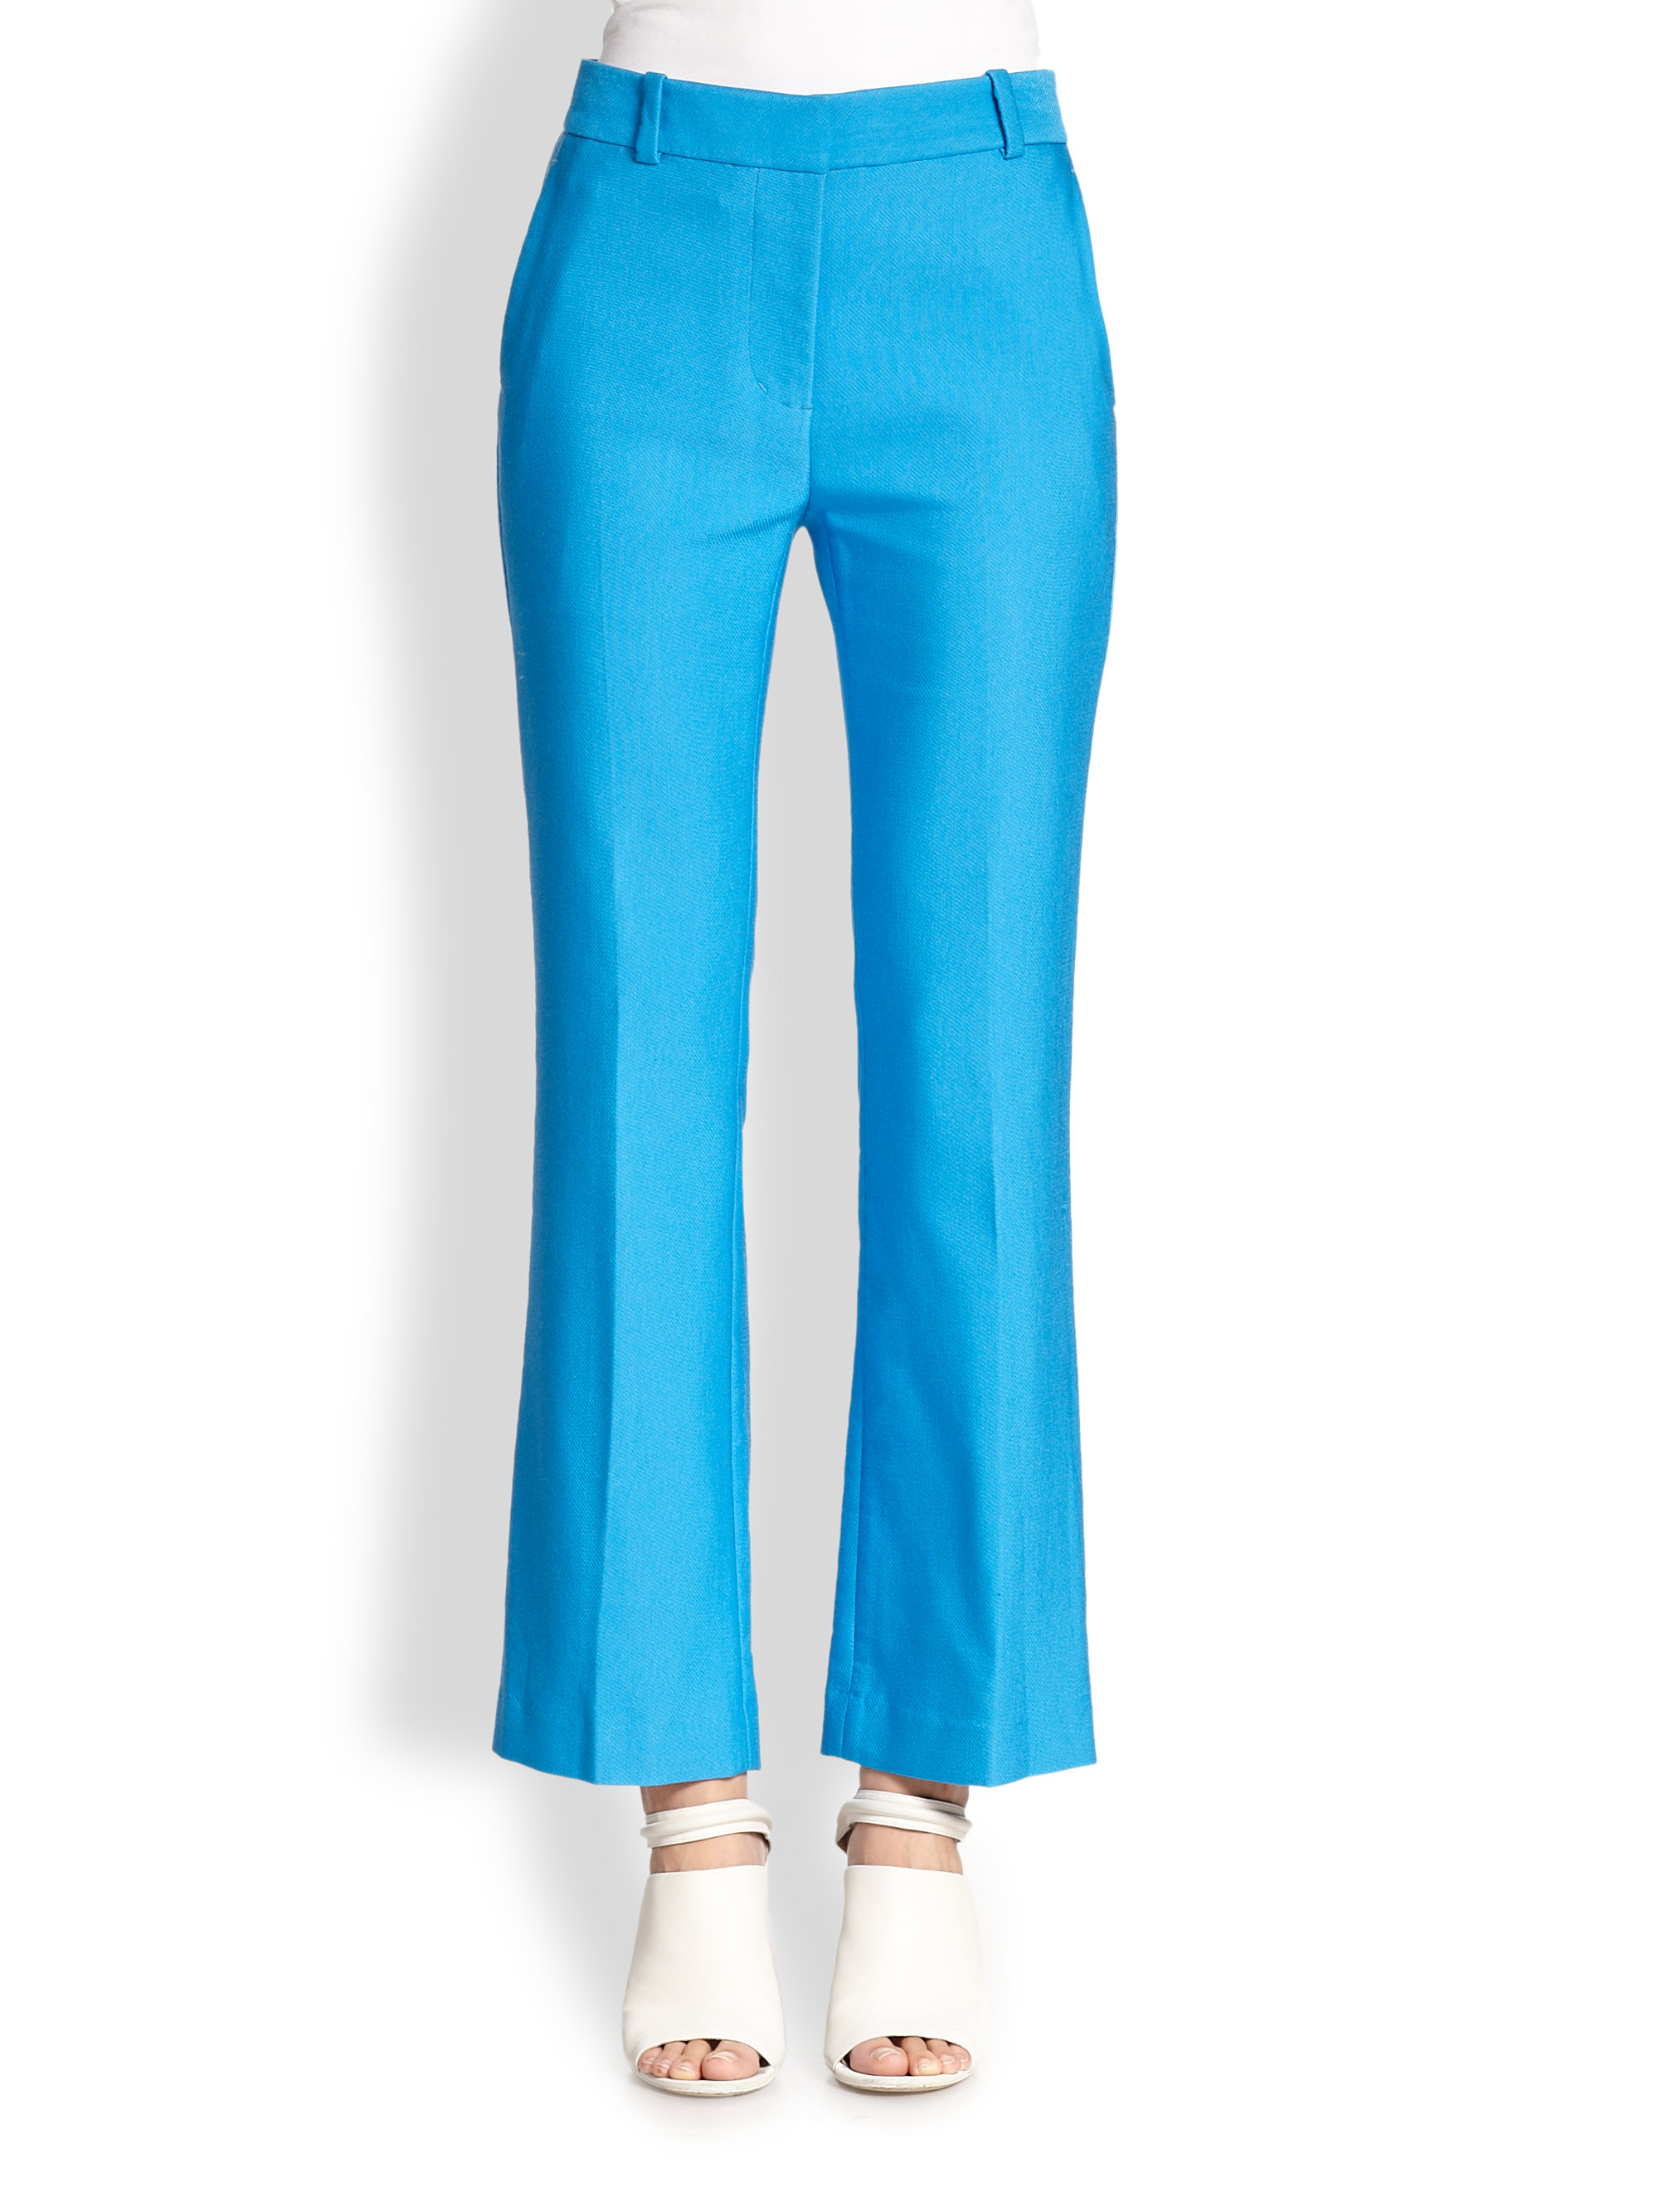 Lyst - 3.1 Phillip Lim Flared Ankle Pants in Blue